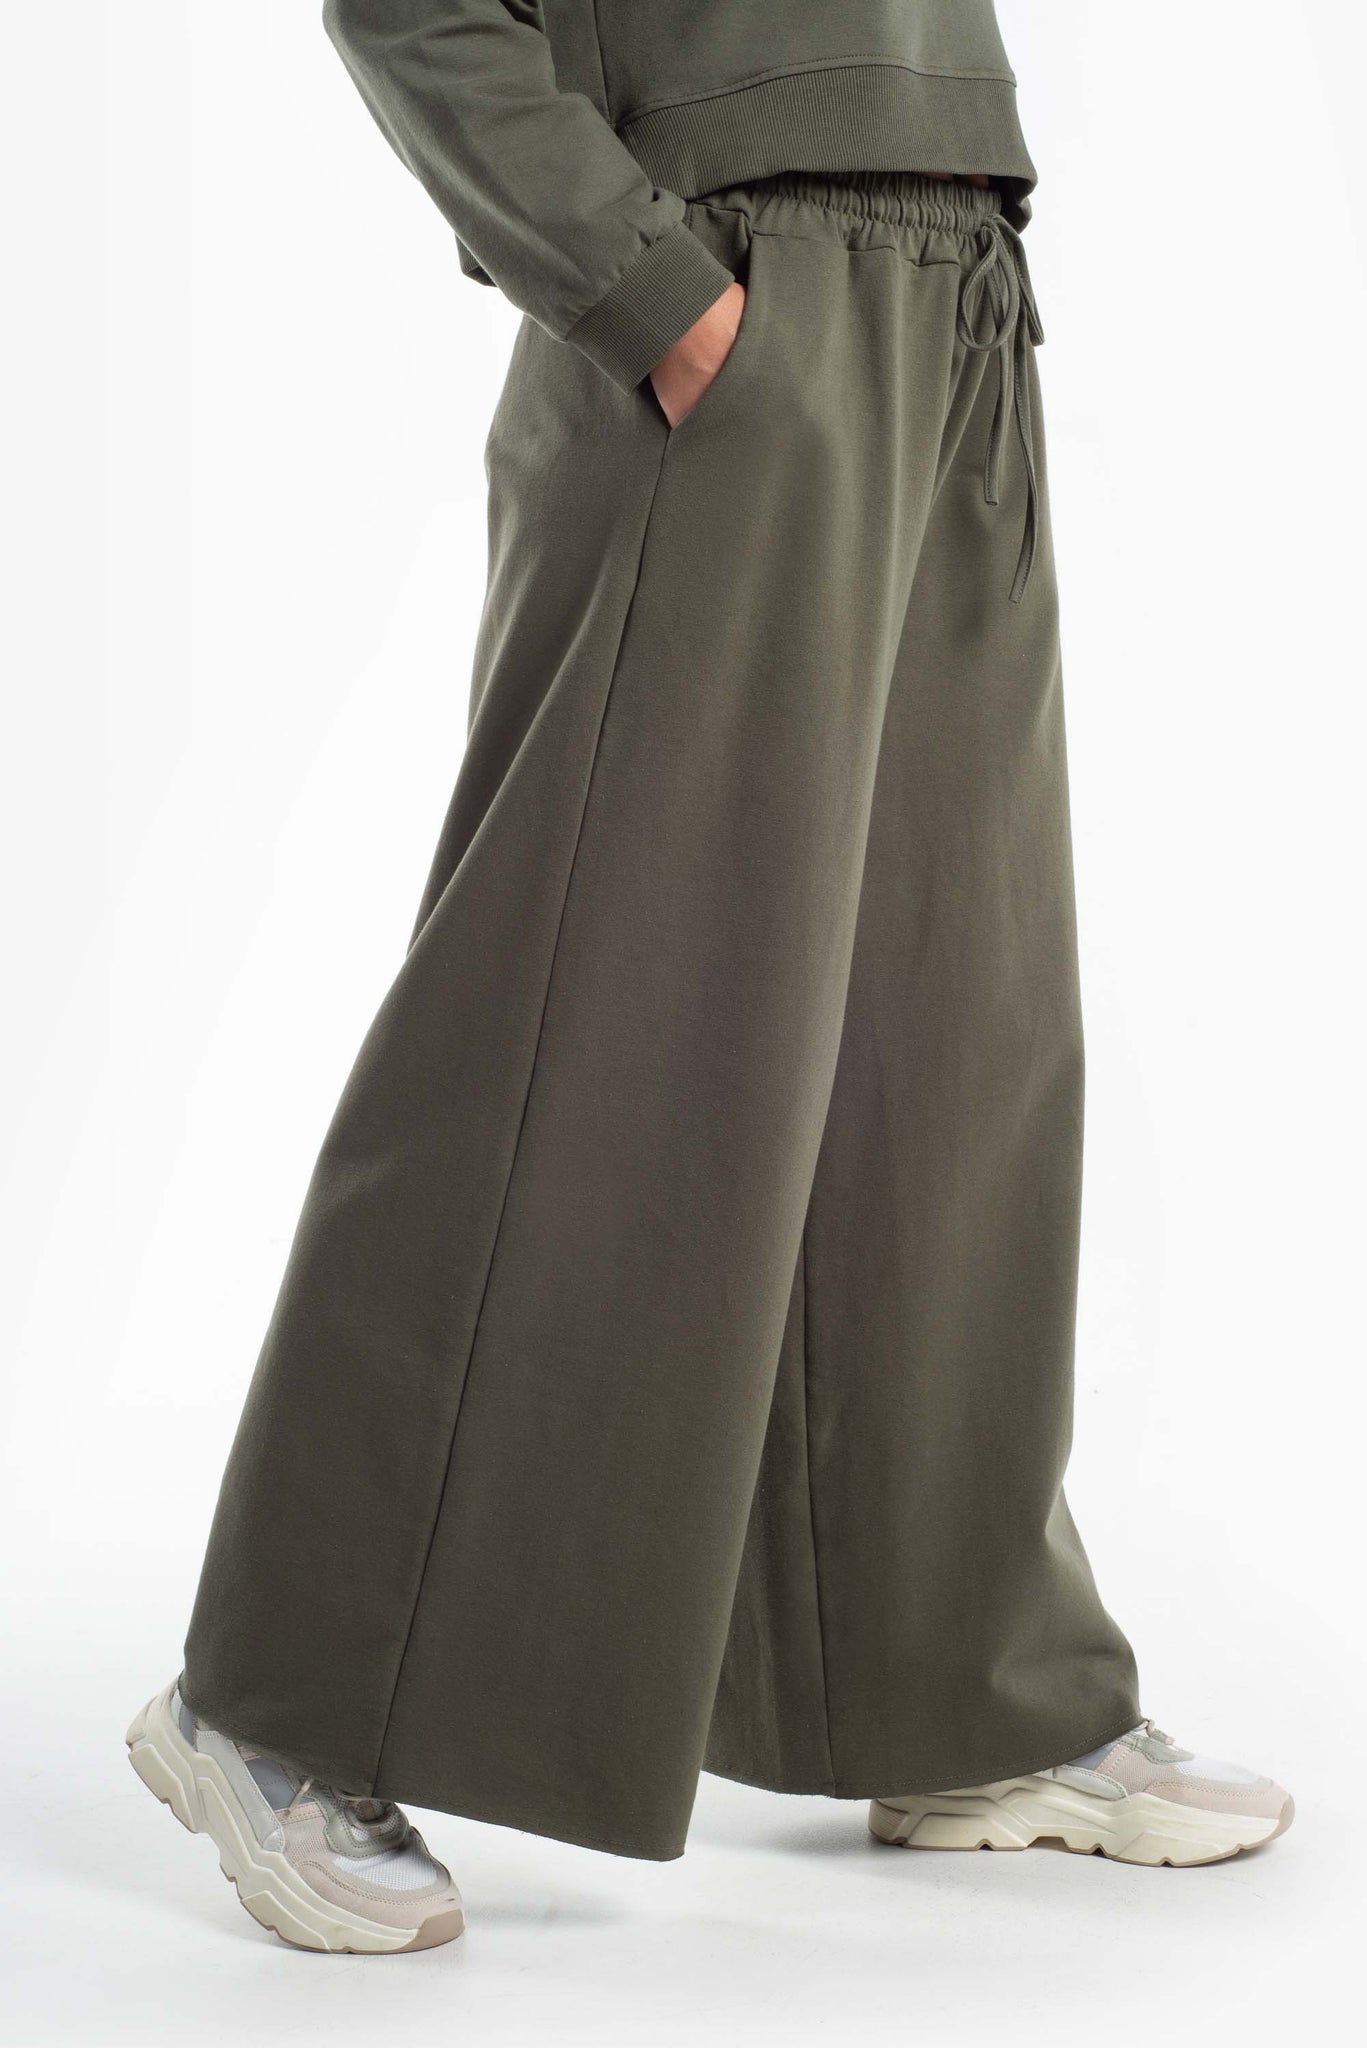 Comfy palazzo trousers